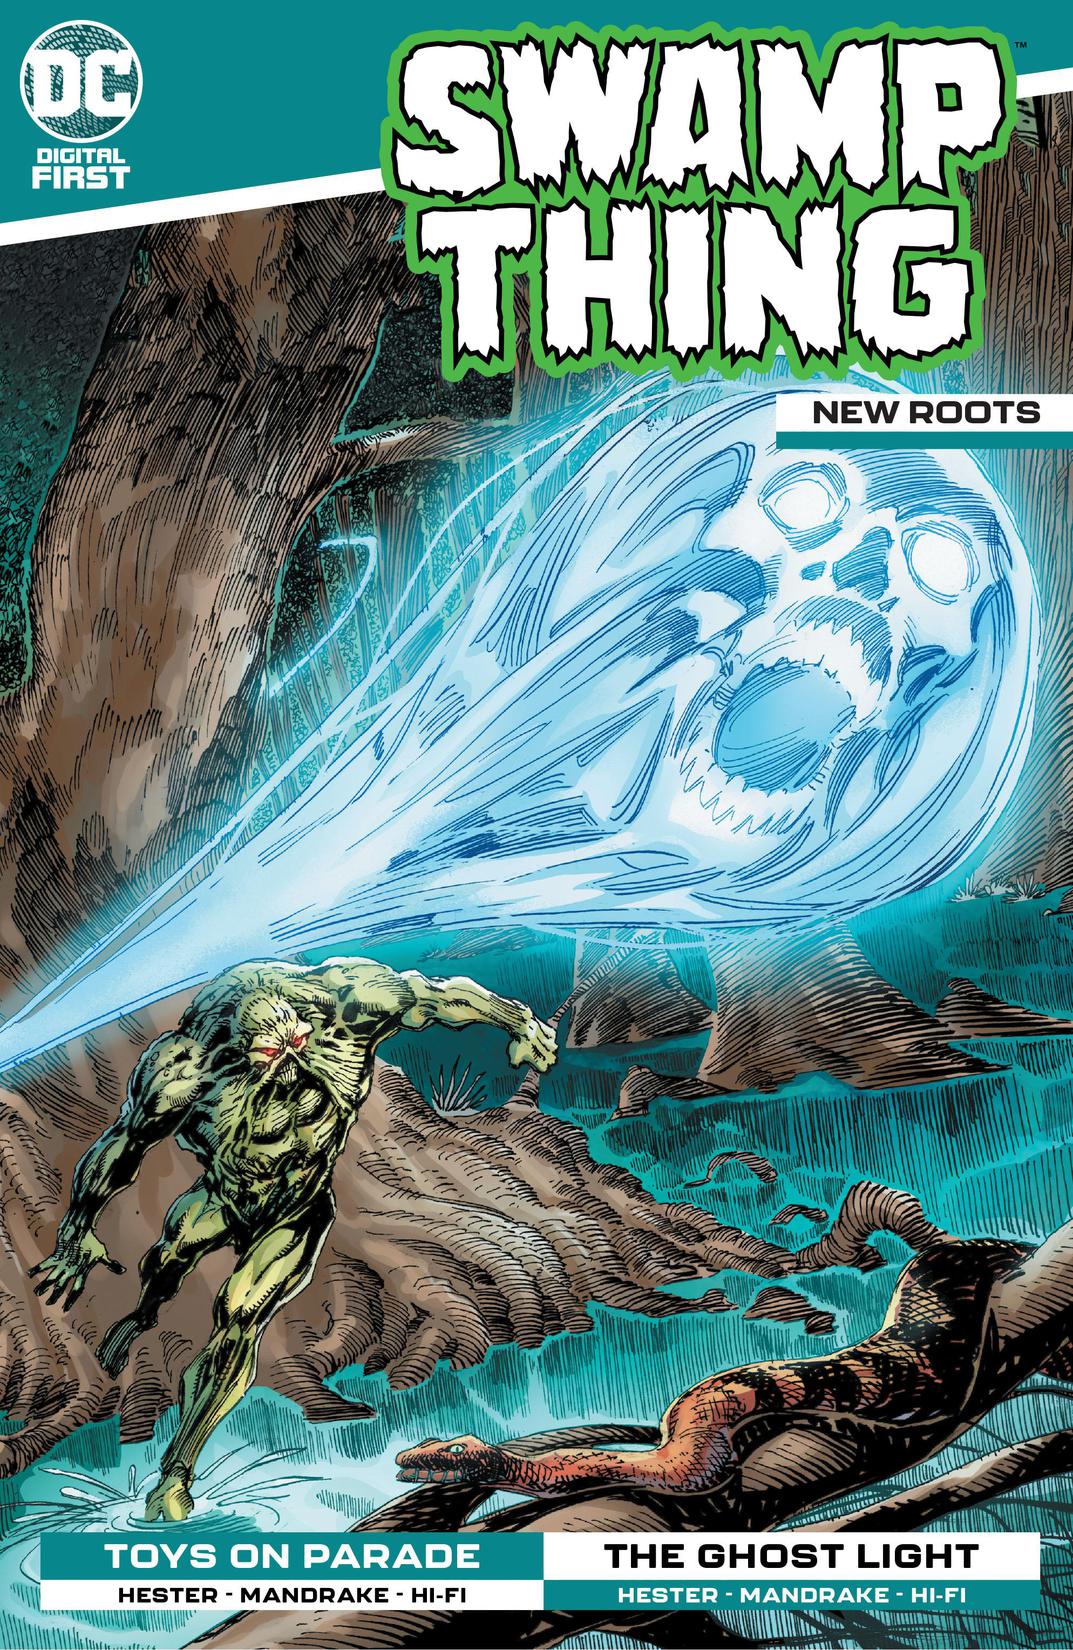 Swamp Thing: New Roots #8 preview images